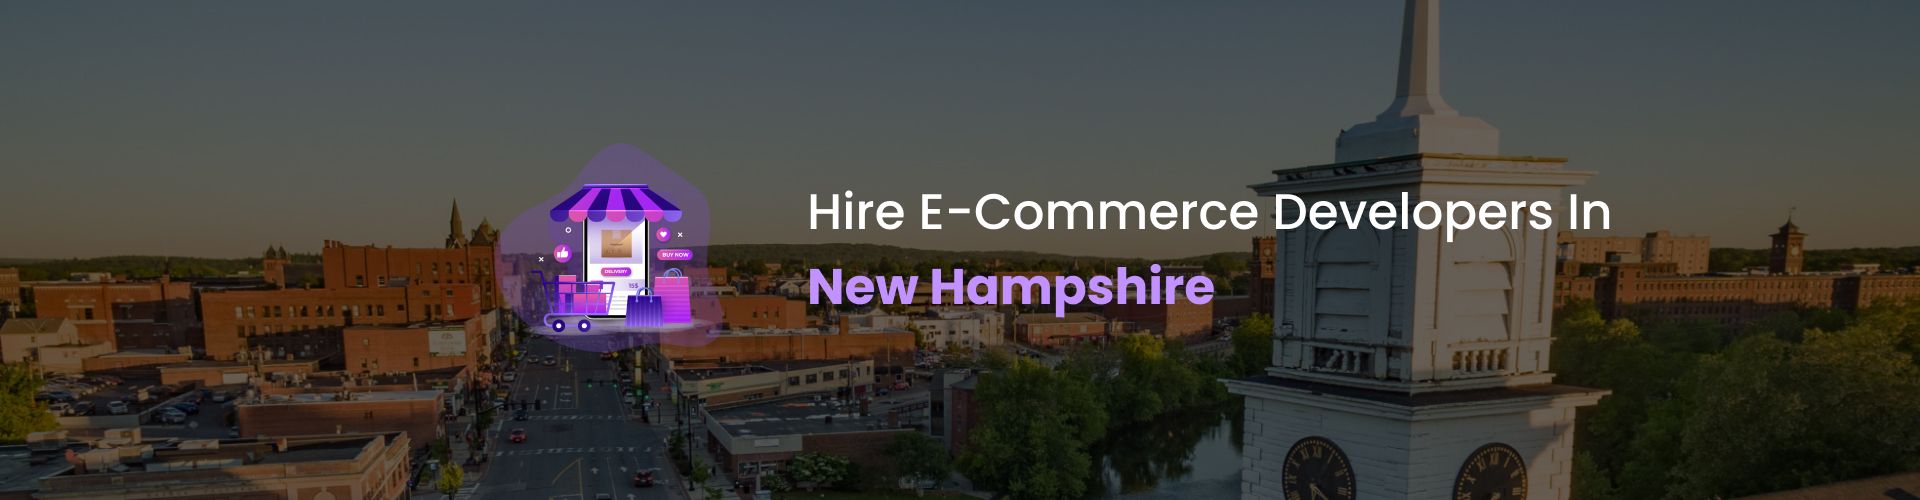 hire ecommerce developers in new hampshire